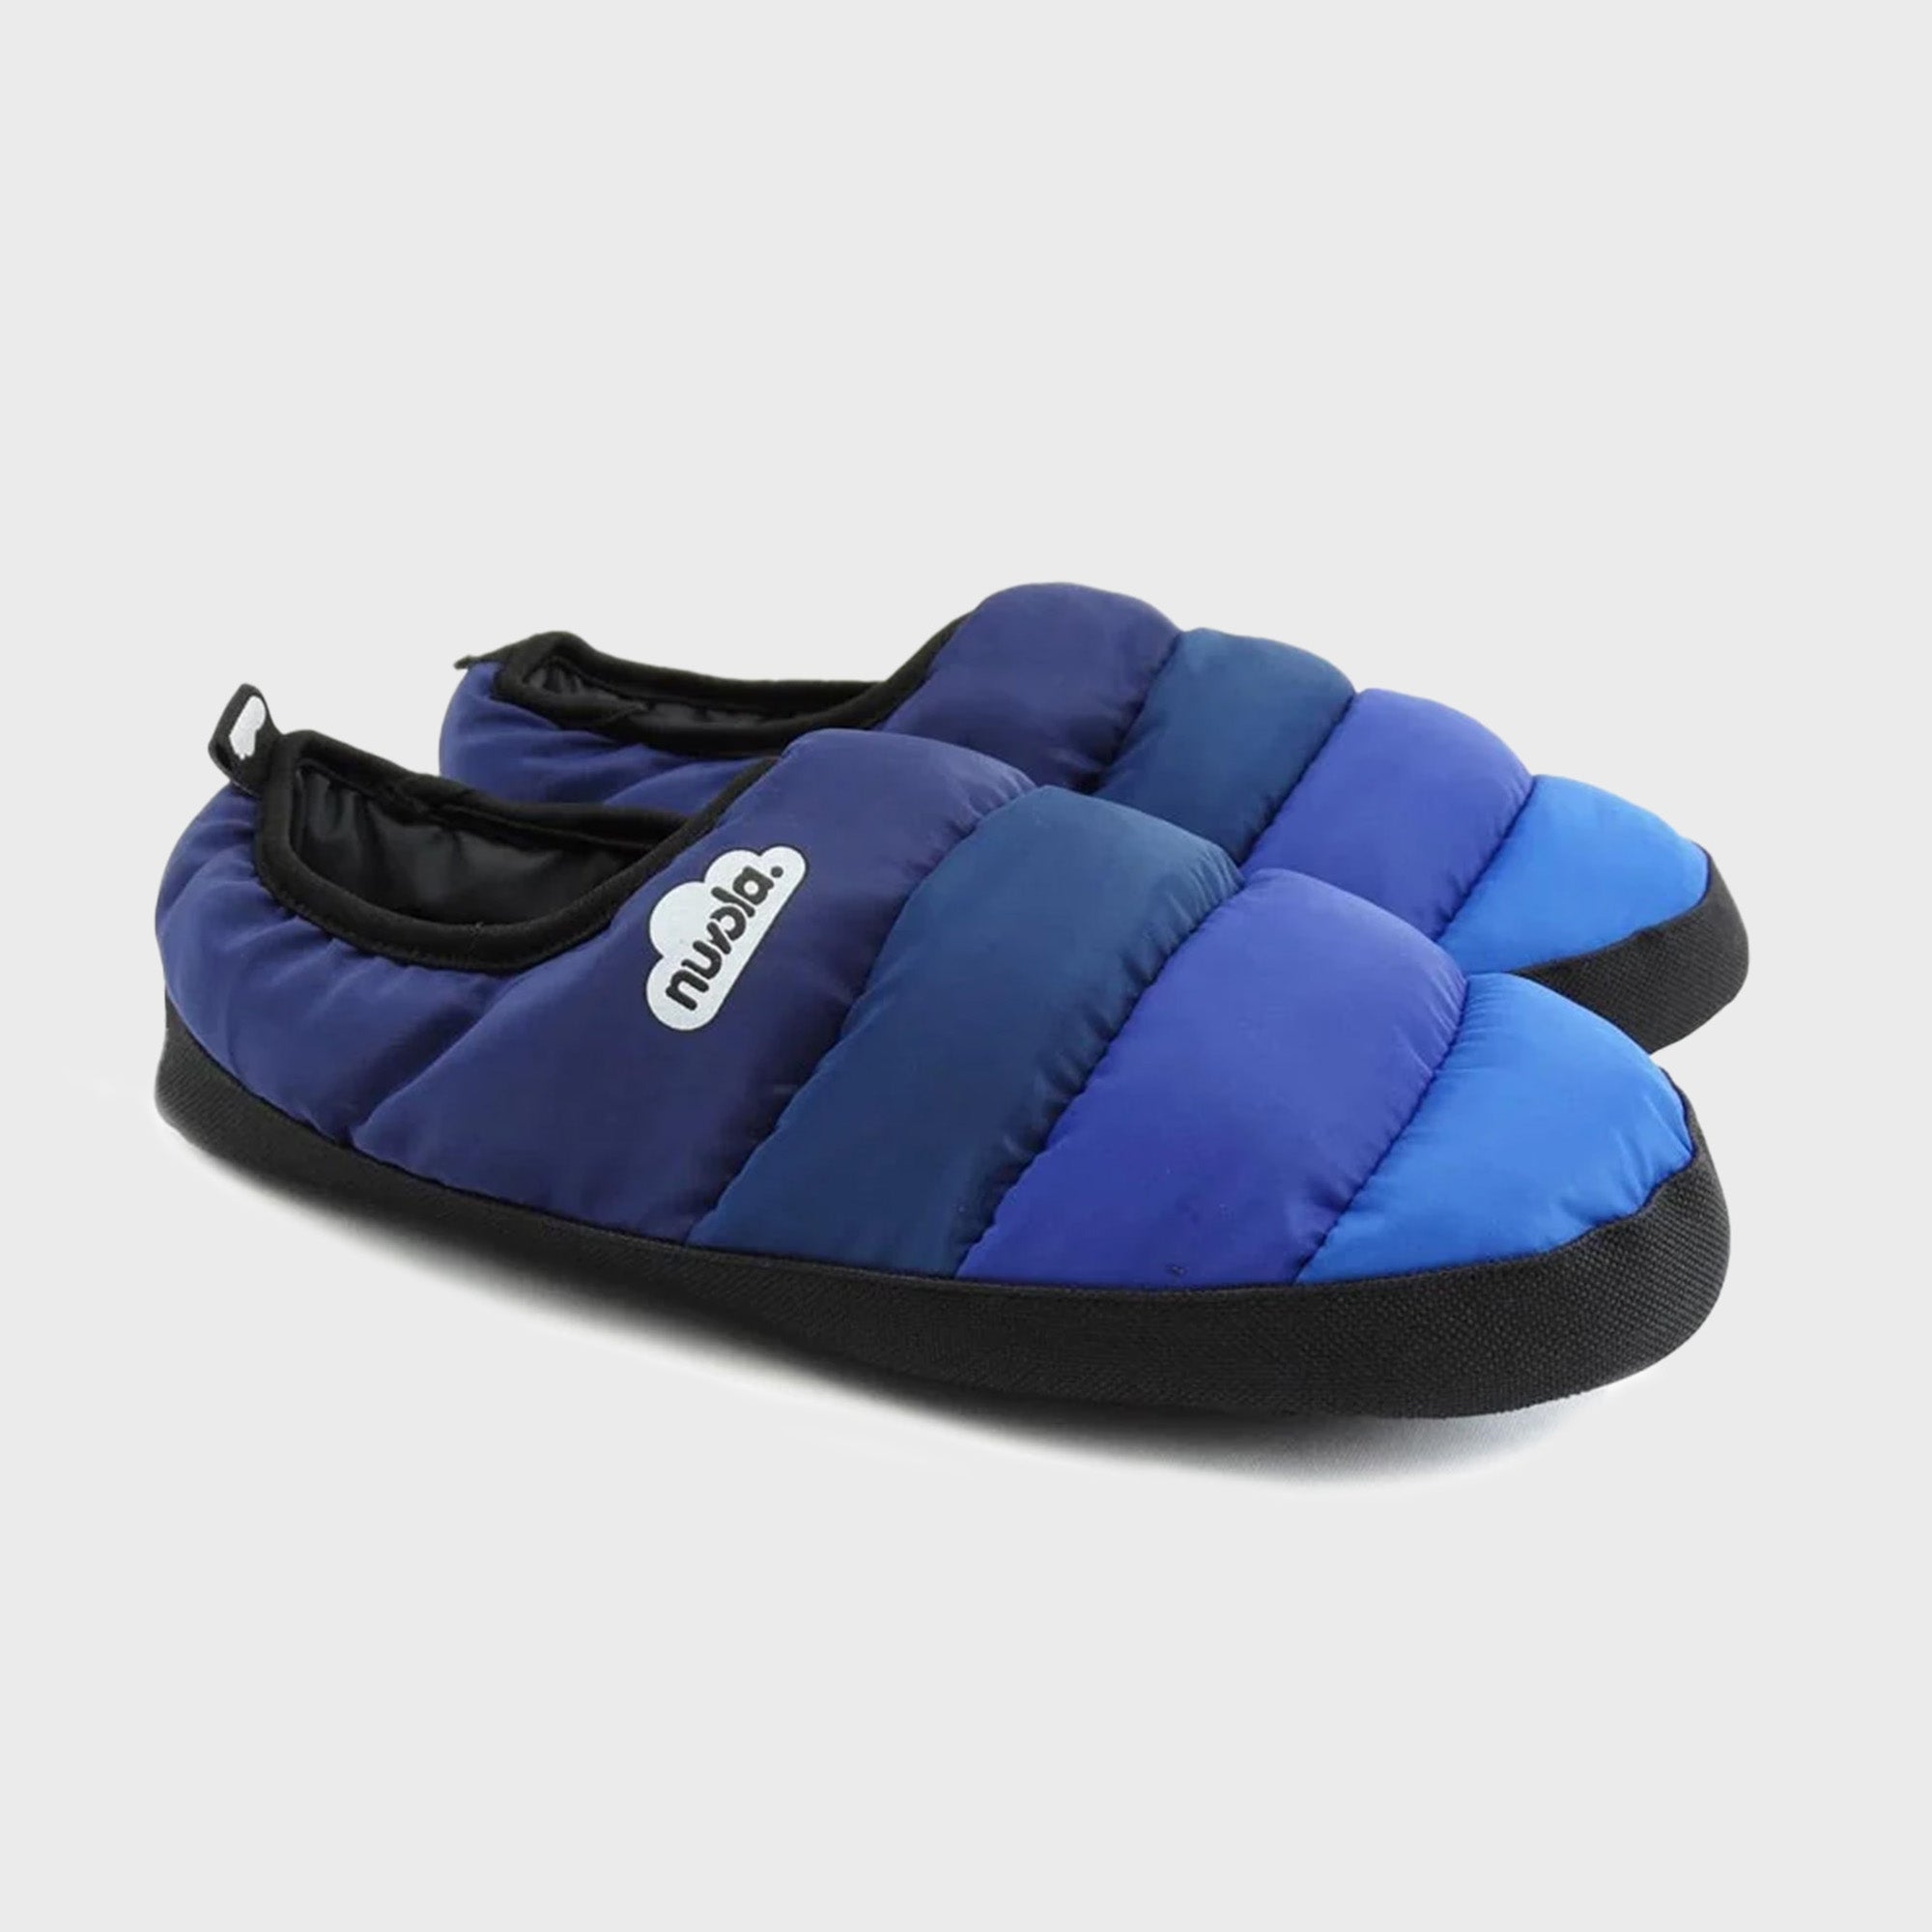 Nuvola Classic Colors Slippers in Blue CNCLACLRS19 FROM EIGHTYWINGOLD - OFFICIAL BRAND PARTNER